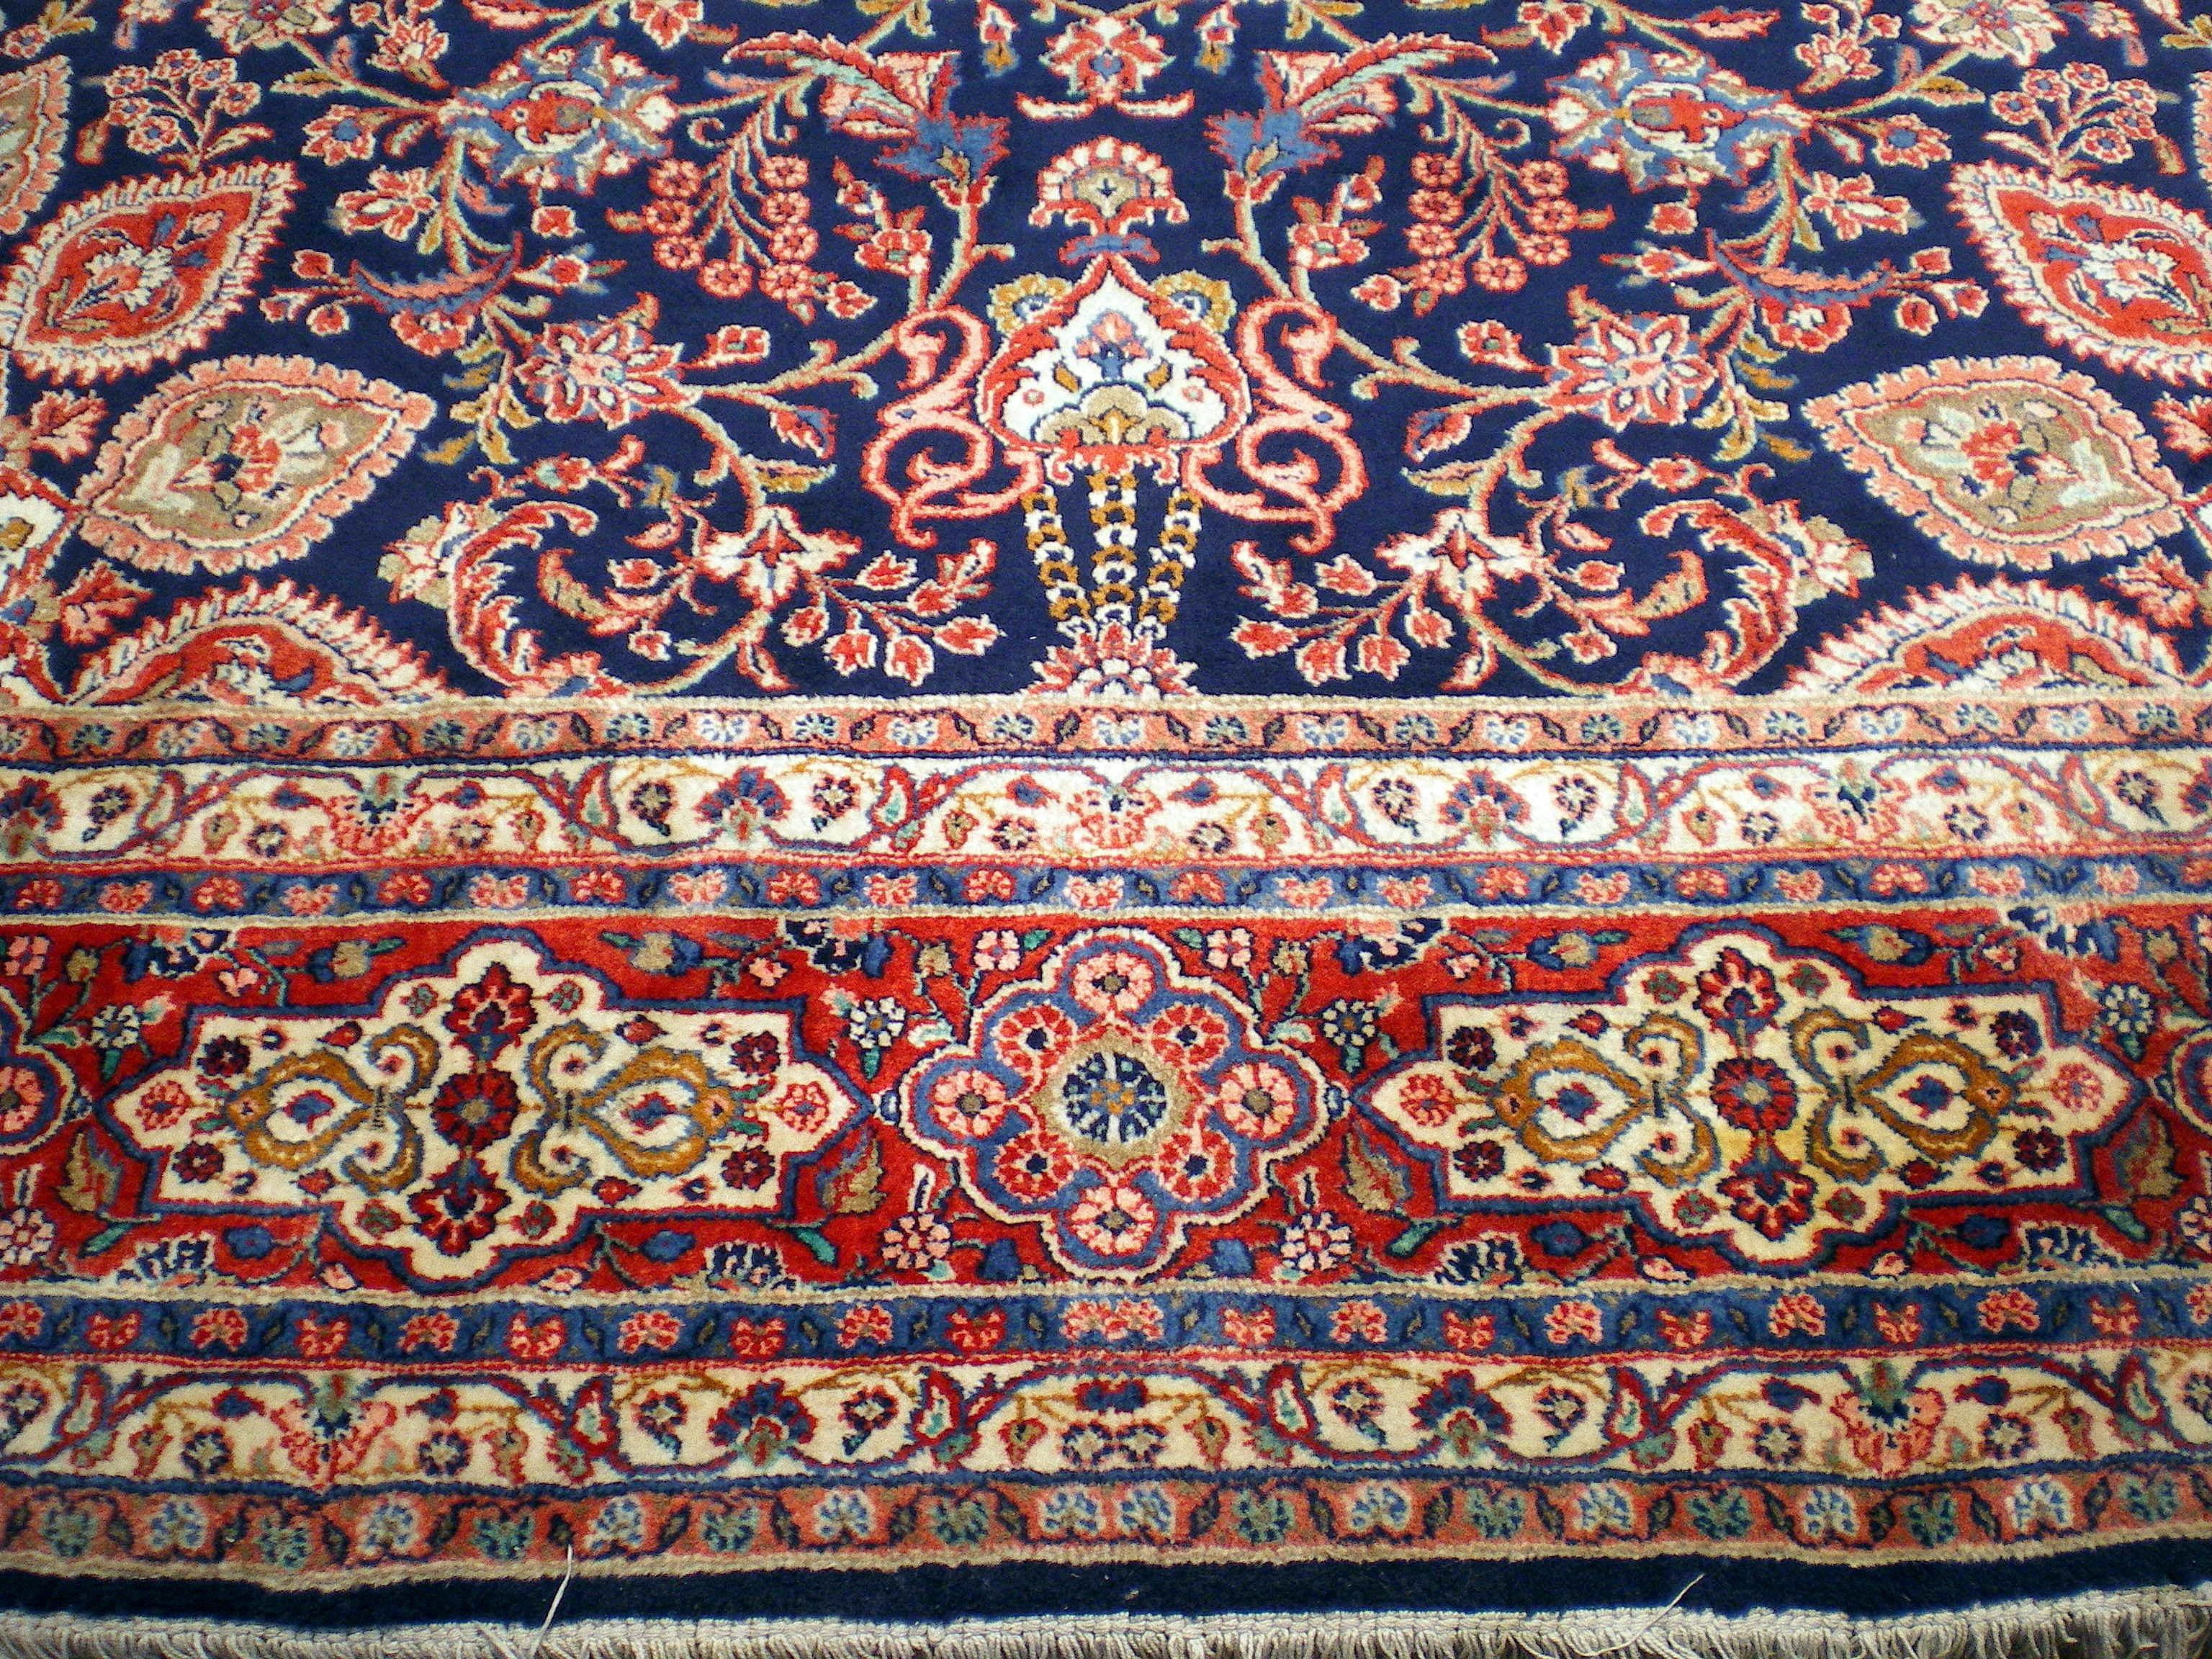 Vintage Persian Sarouk. Woven with very high quality wool.
The colors and texture has soften through out the years. This would take a couple of years to complete for a weaver. This paticular one has a Shahabbasi design which is also known as